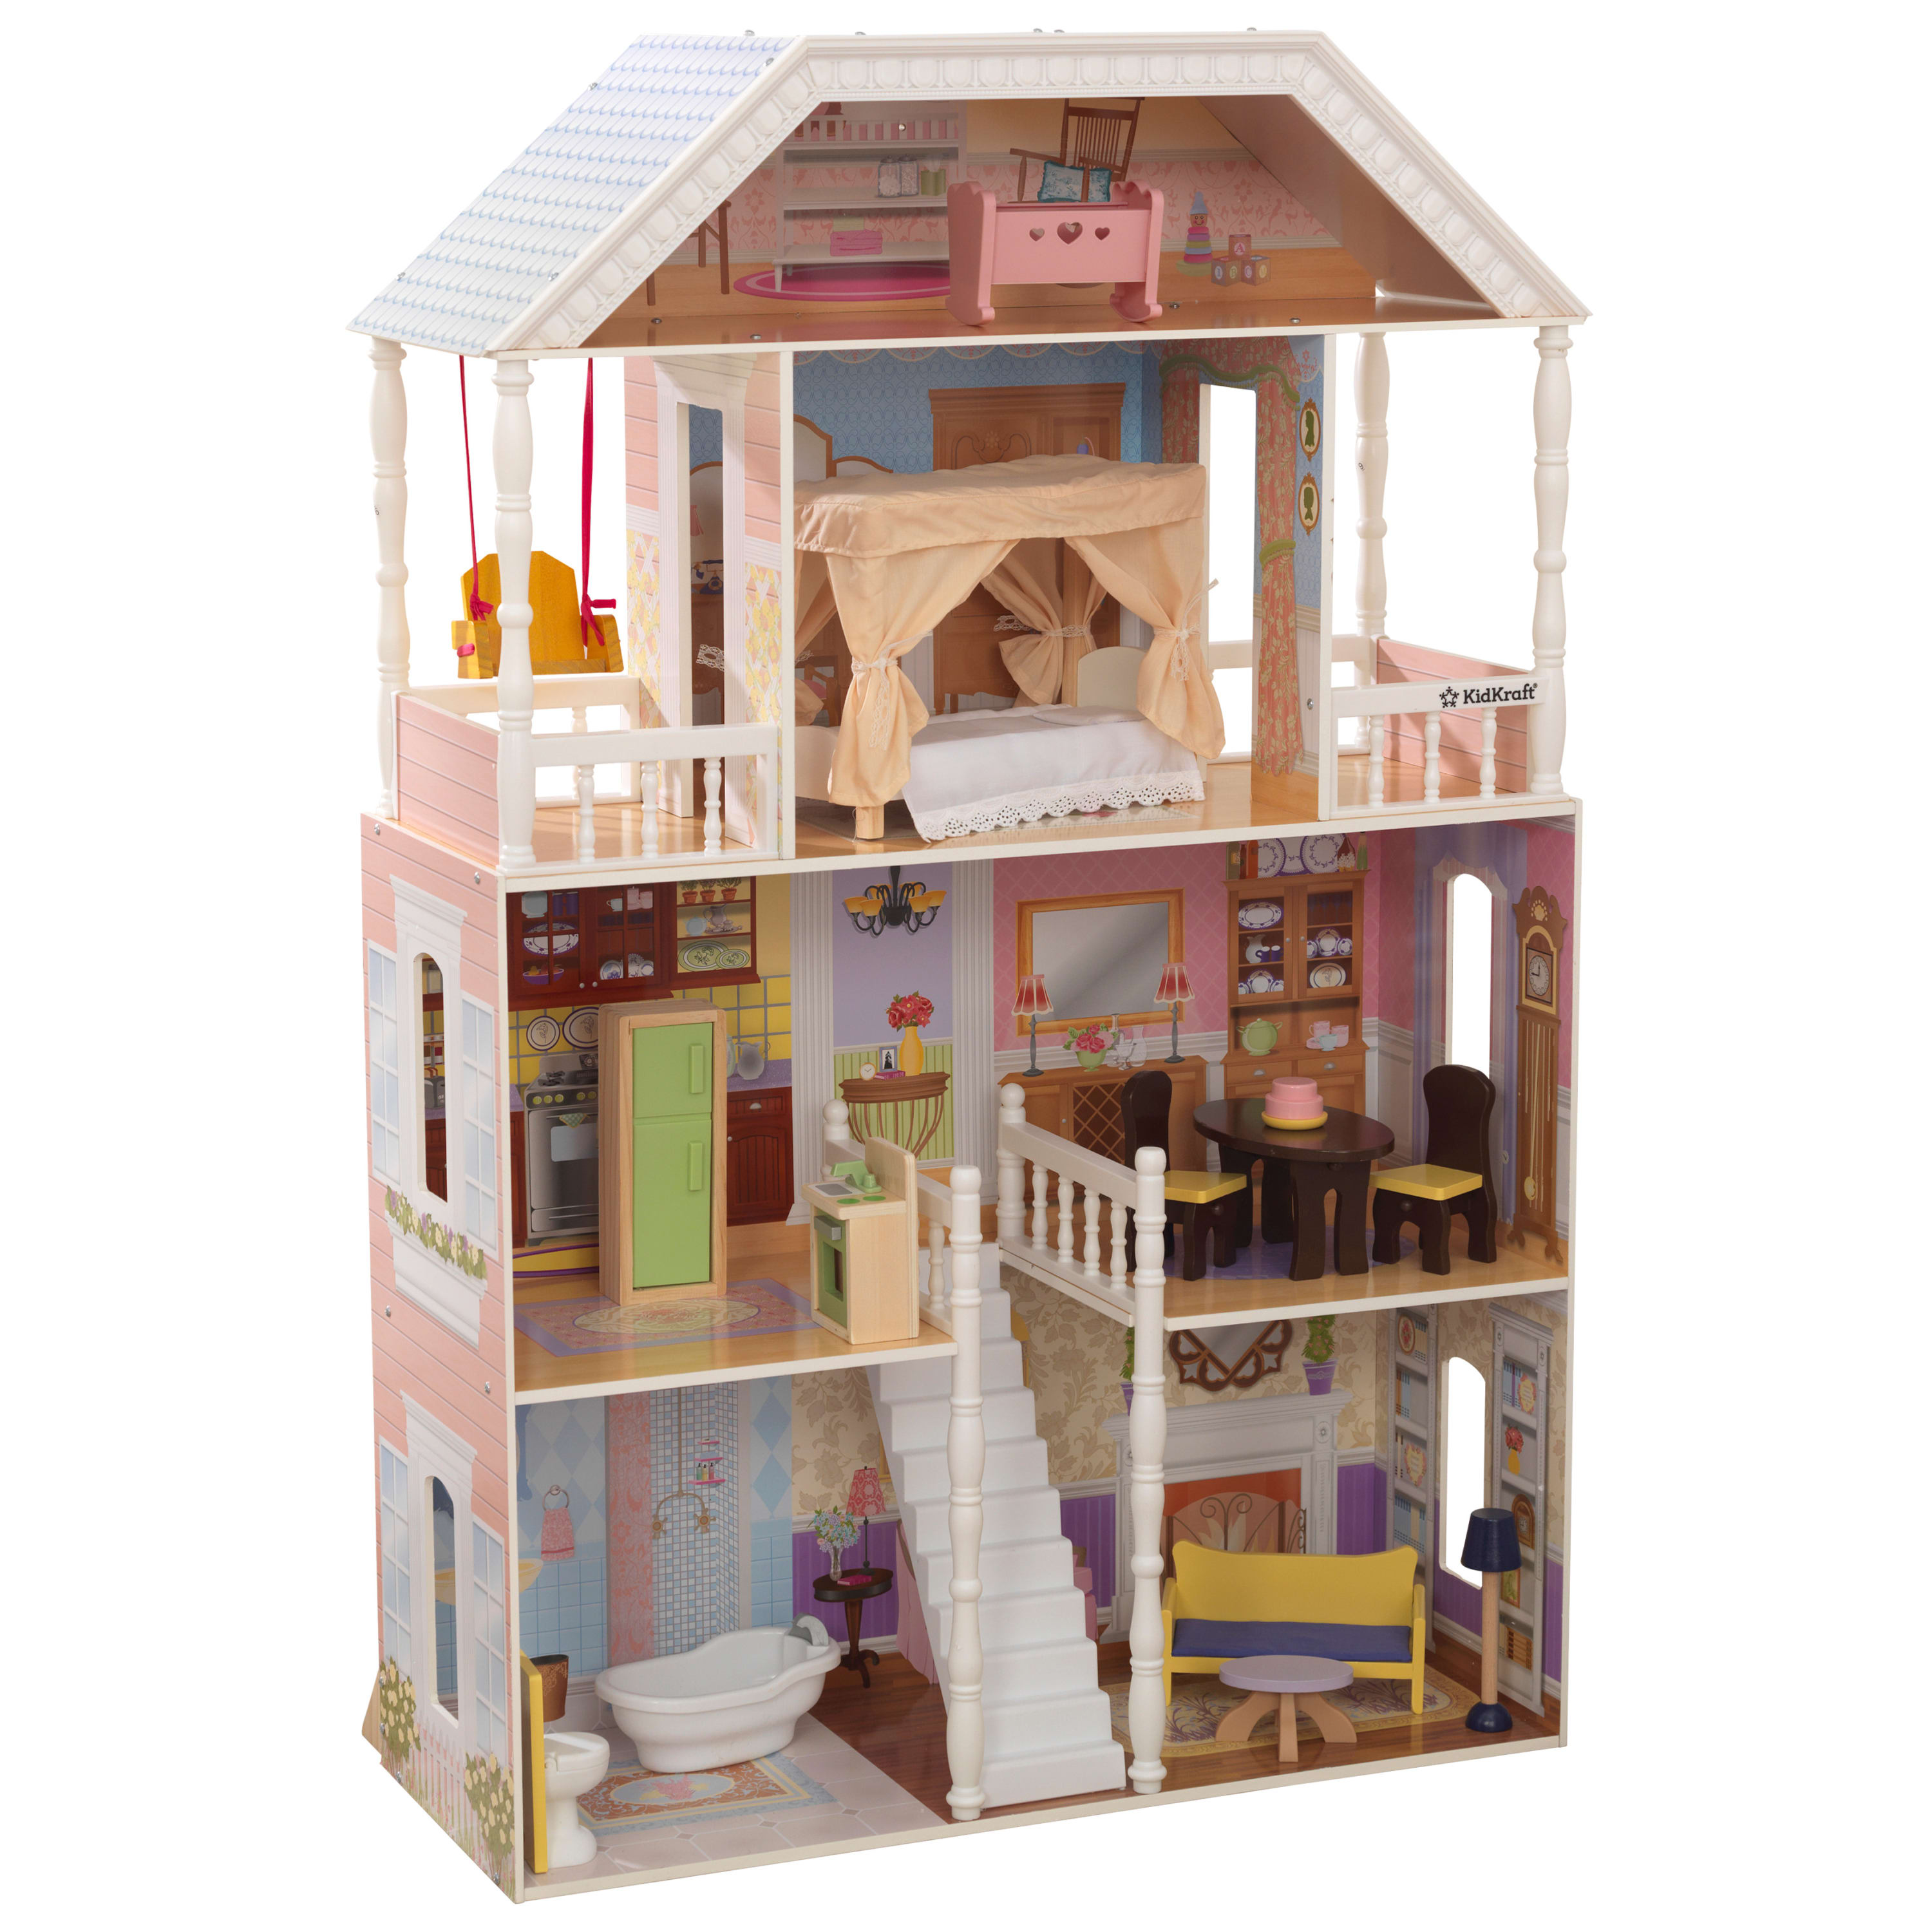 KidKraft Savannah Wooden Dollhouse with Porch Swing and 14 Accessories, Ages 3 and up - image 1 of 10